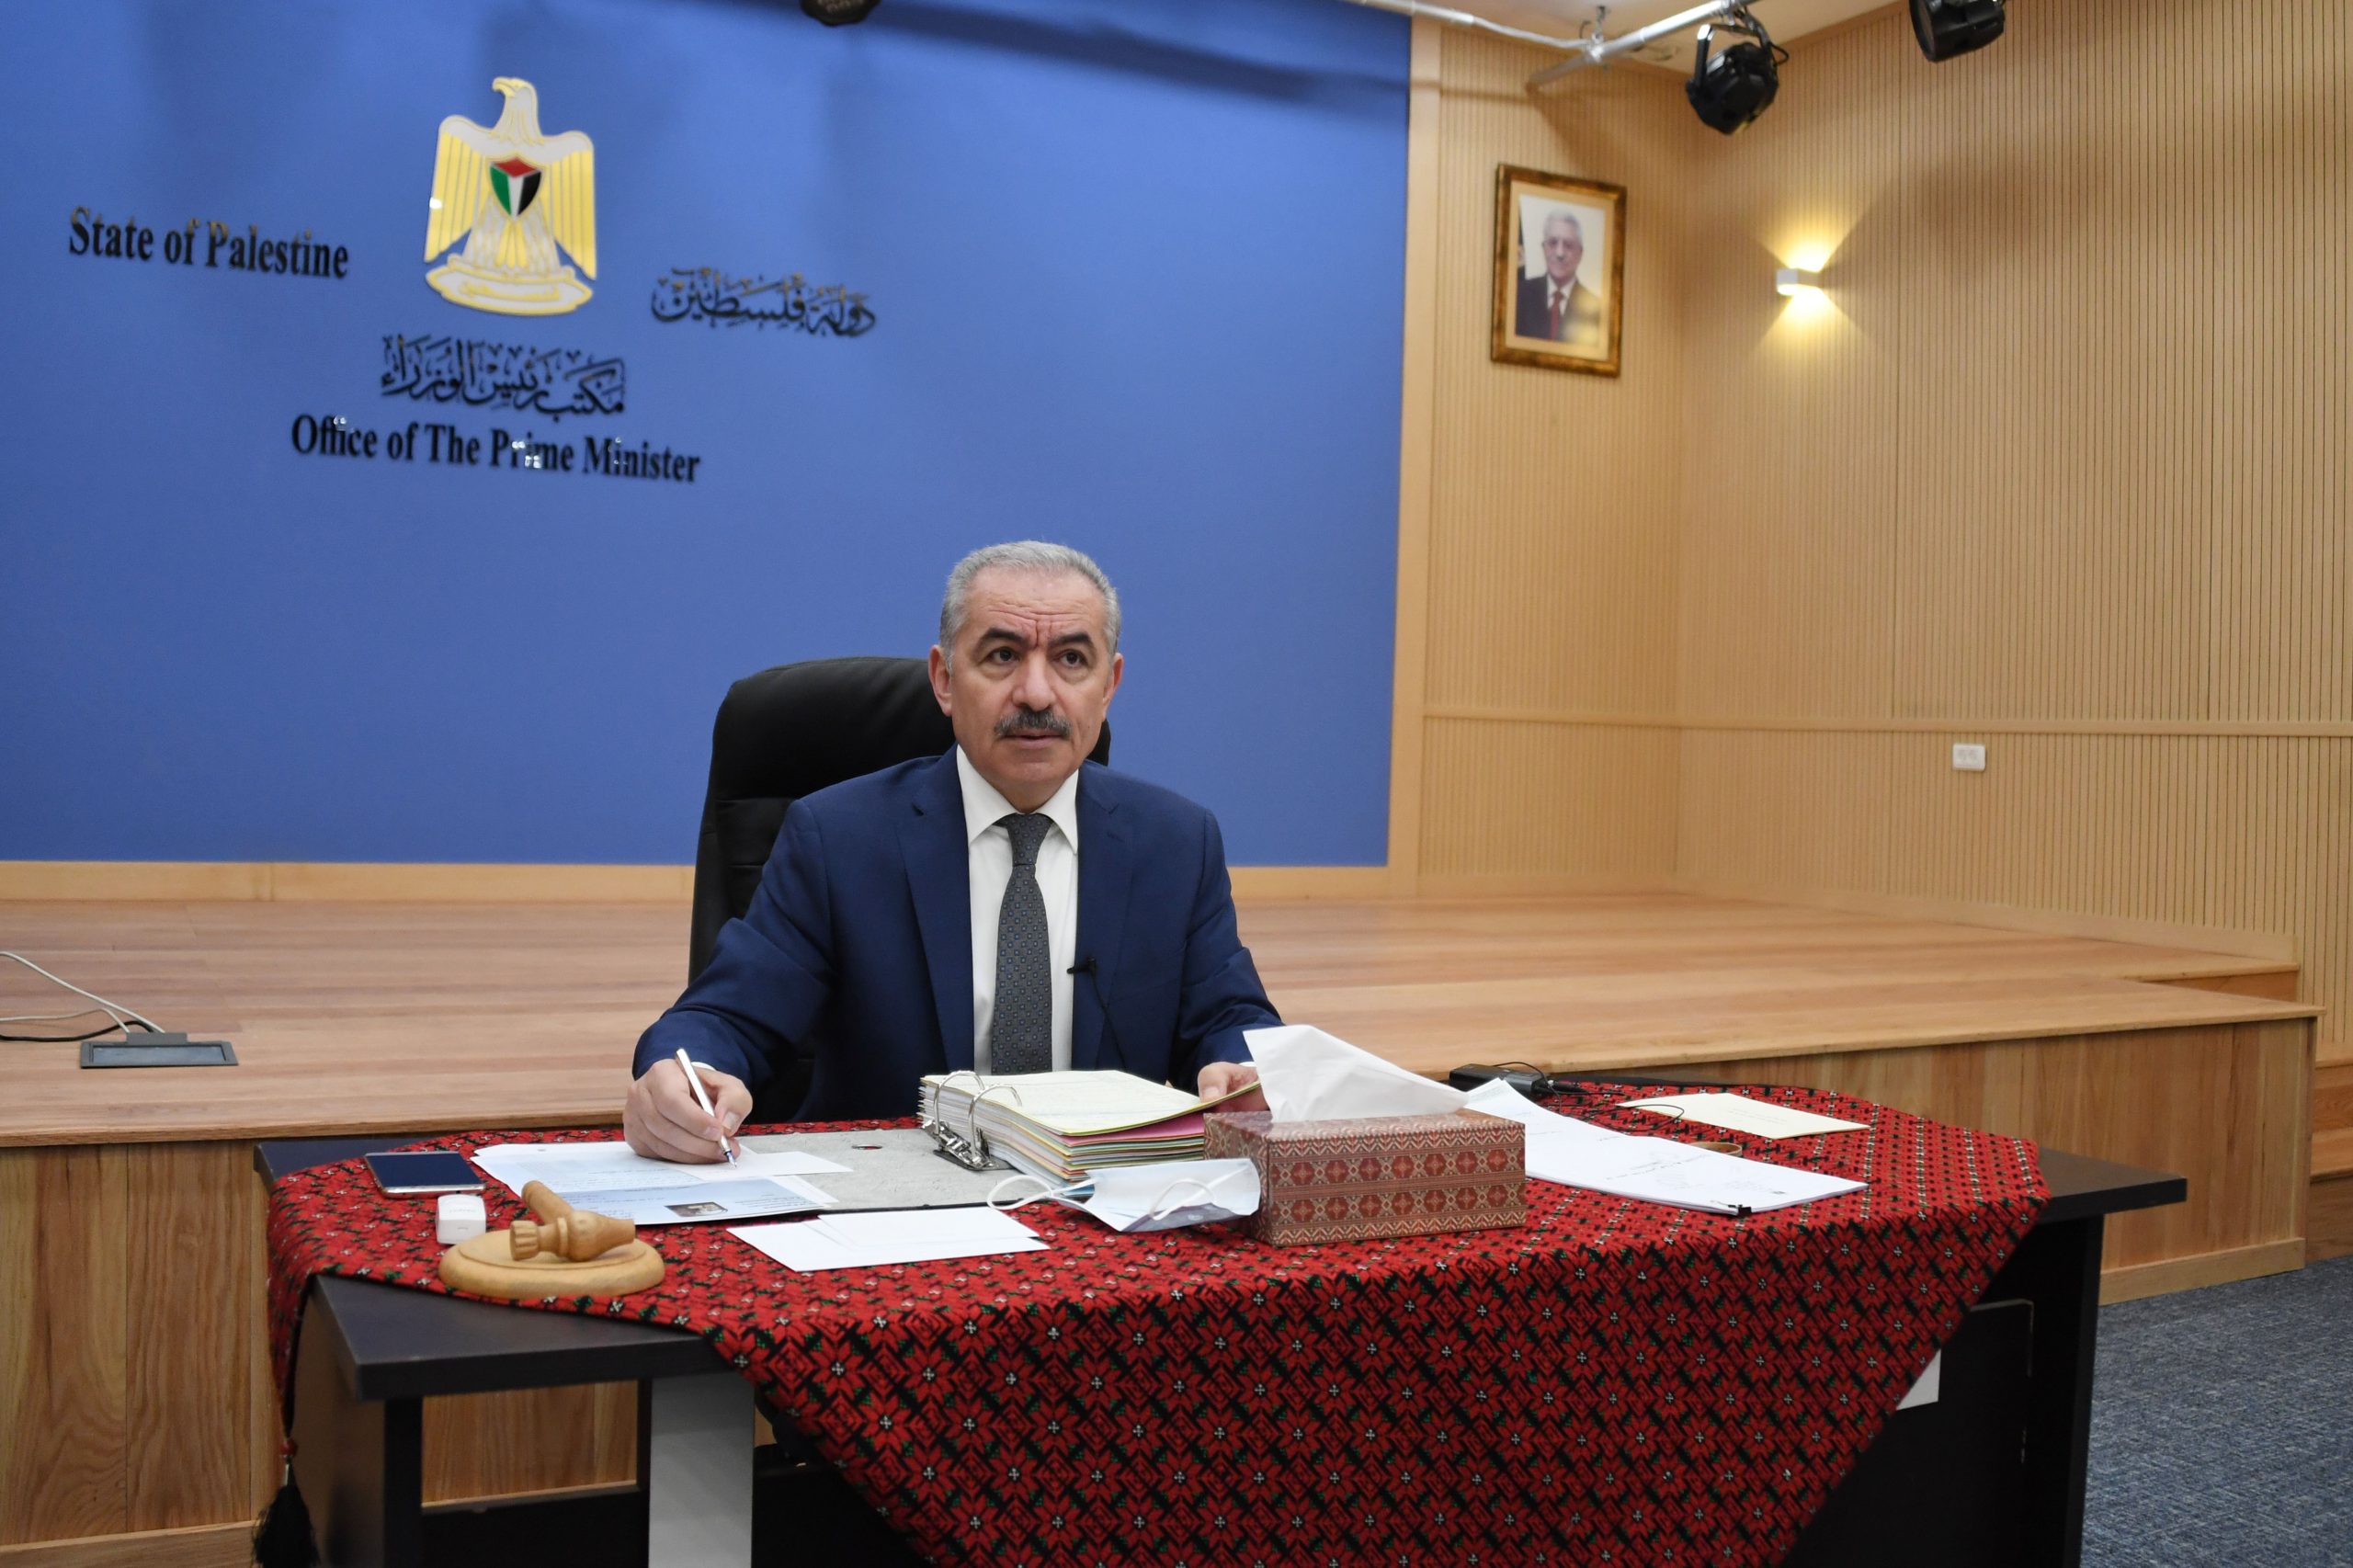 PM Shtayyeh renews call for ending double standards in applying international law